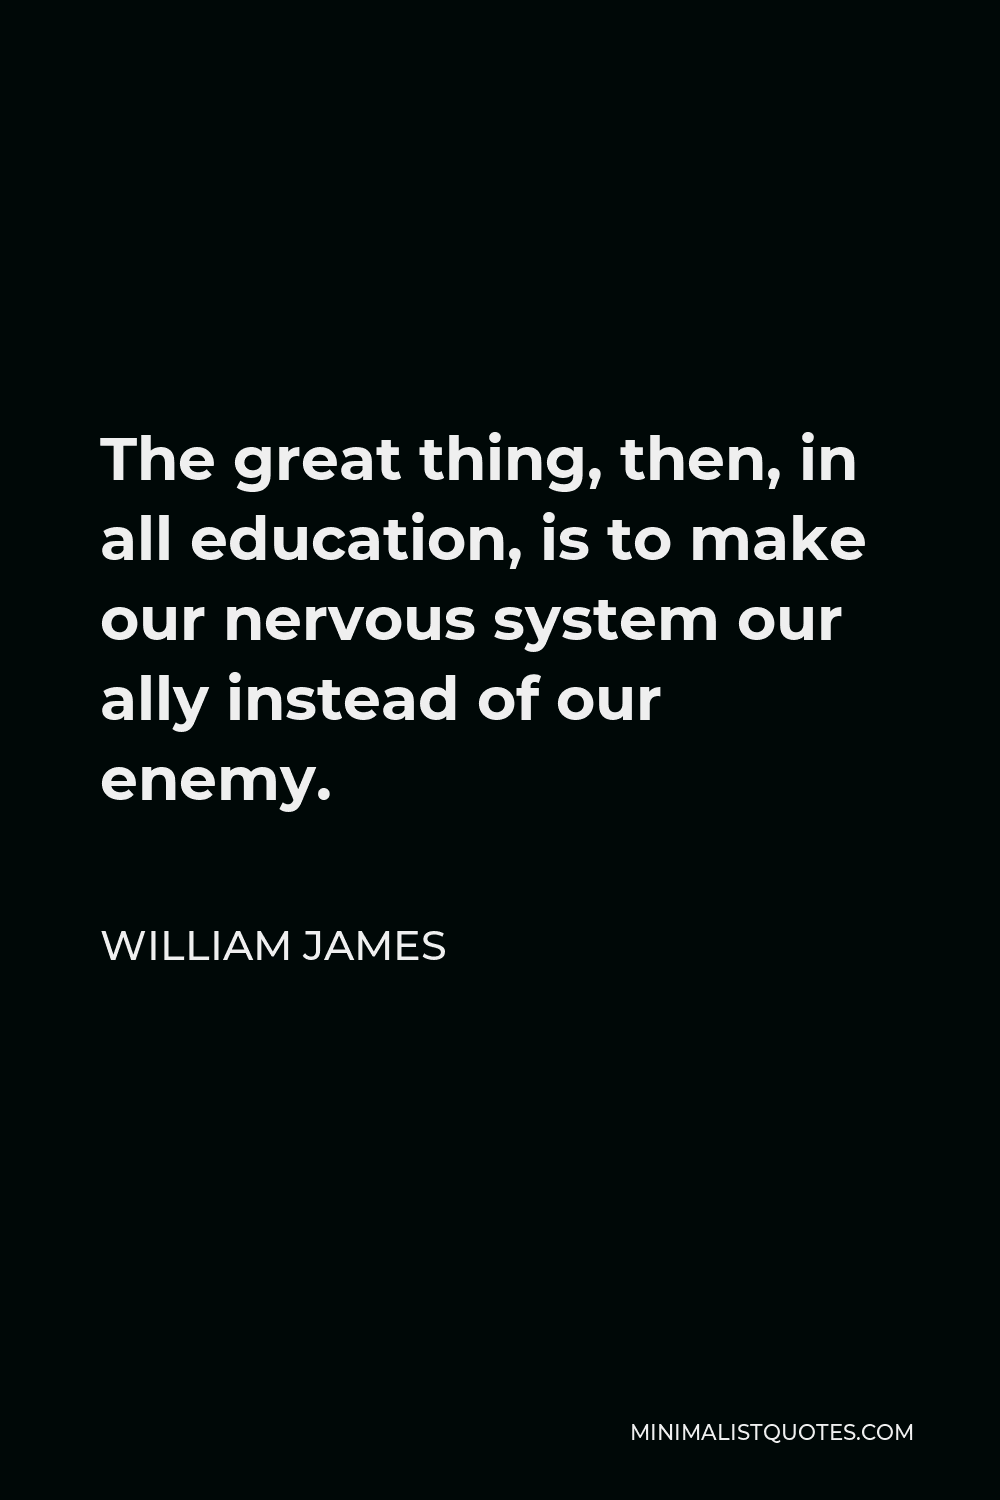 William James Quote - The great thing, then, in all education, is to make our nervous system our ally instead of our enemy.